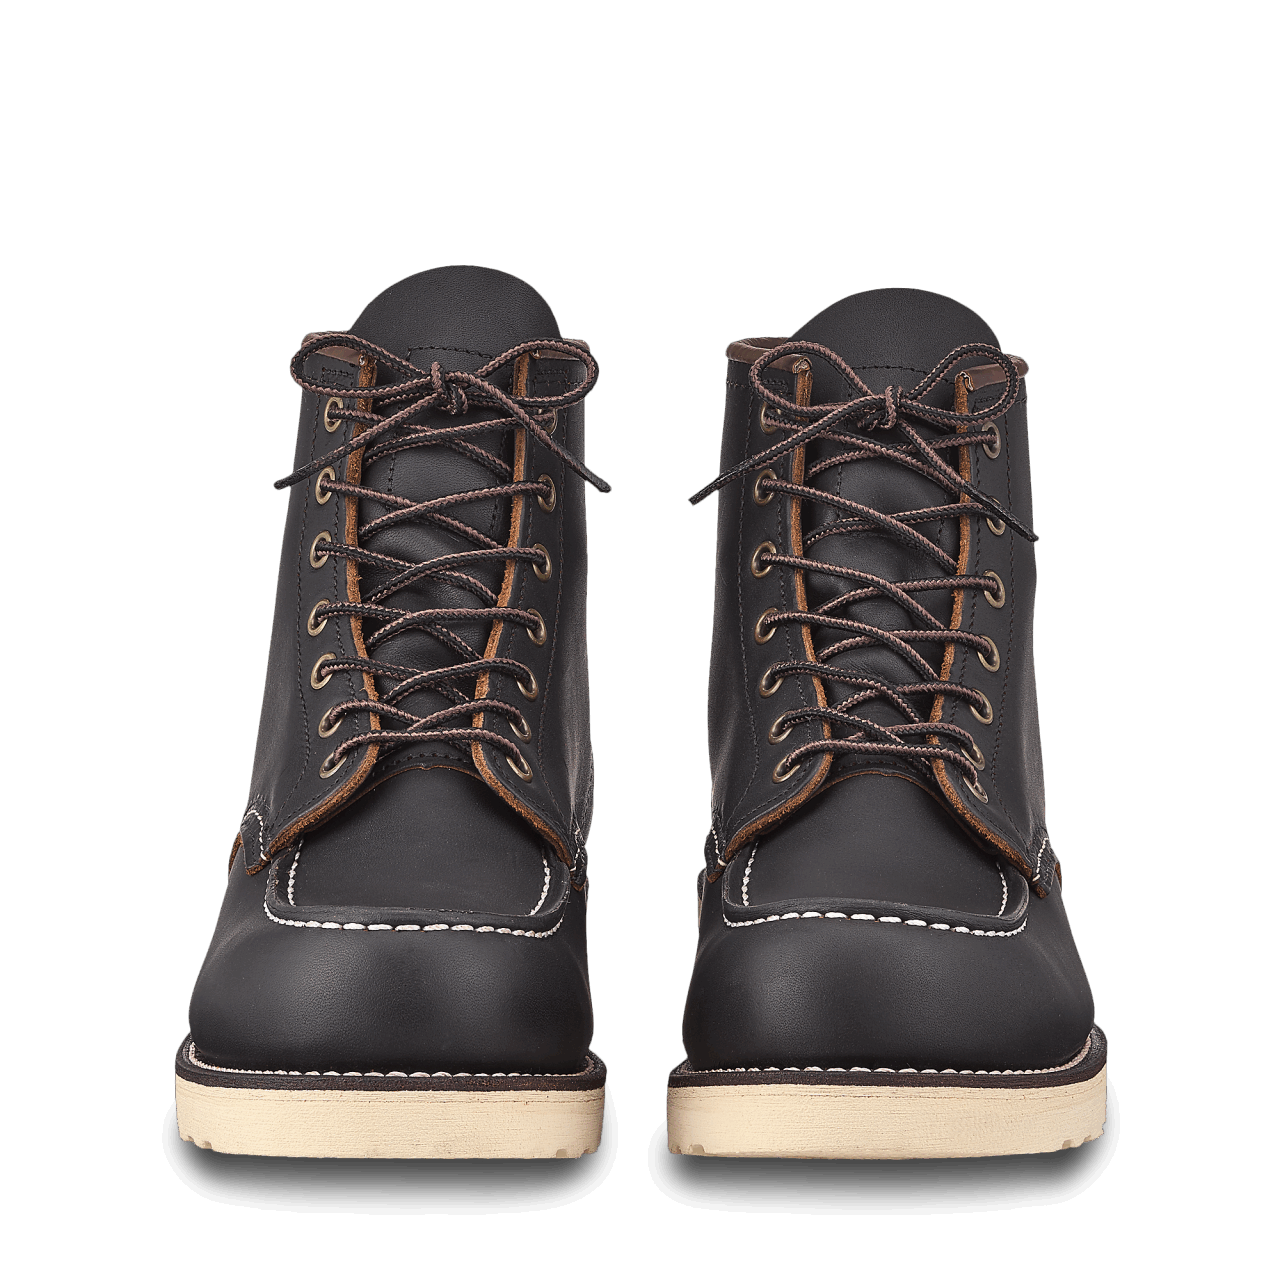 Red Wing 8849 Classic Moc